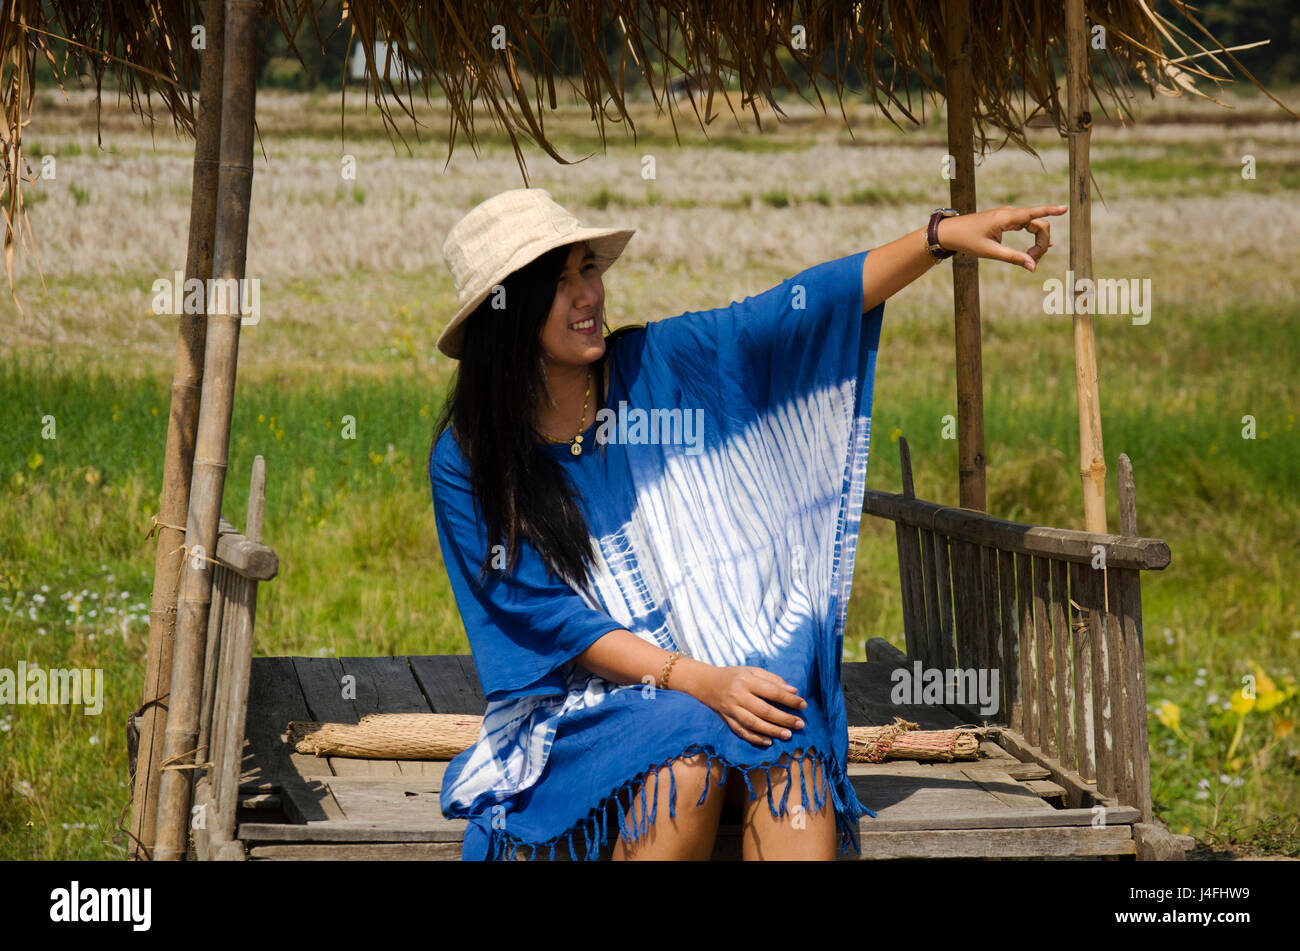 Thai Women People Travel And Posing Sit In Hut At Garden With